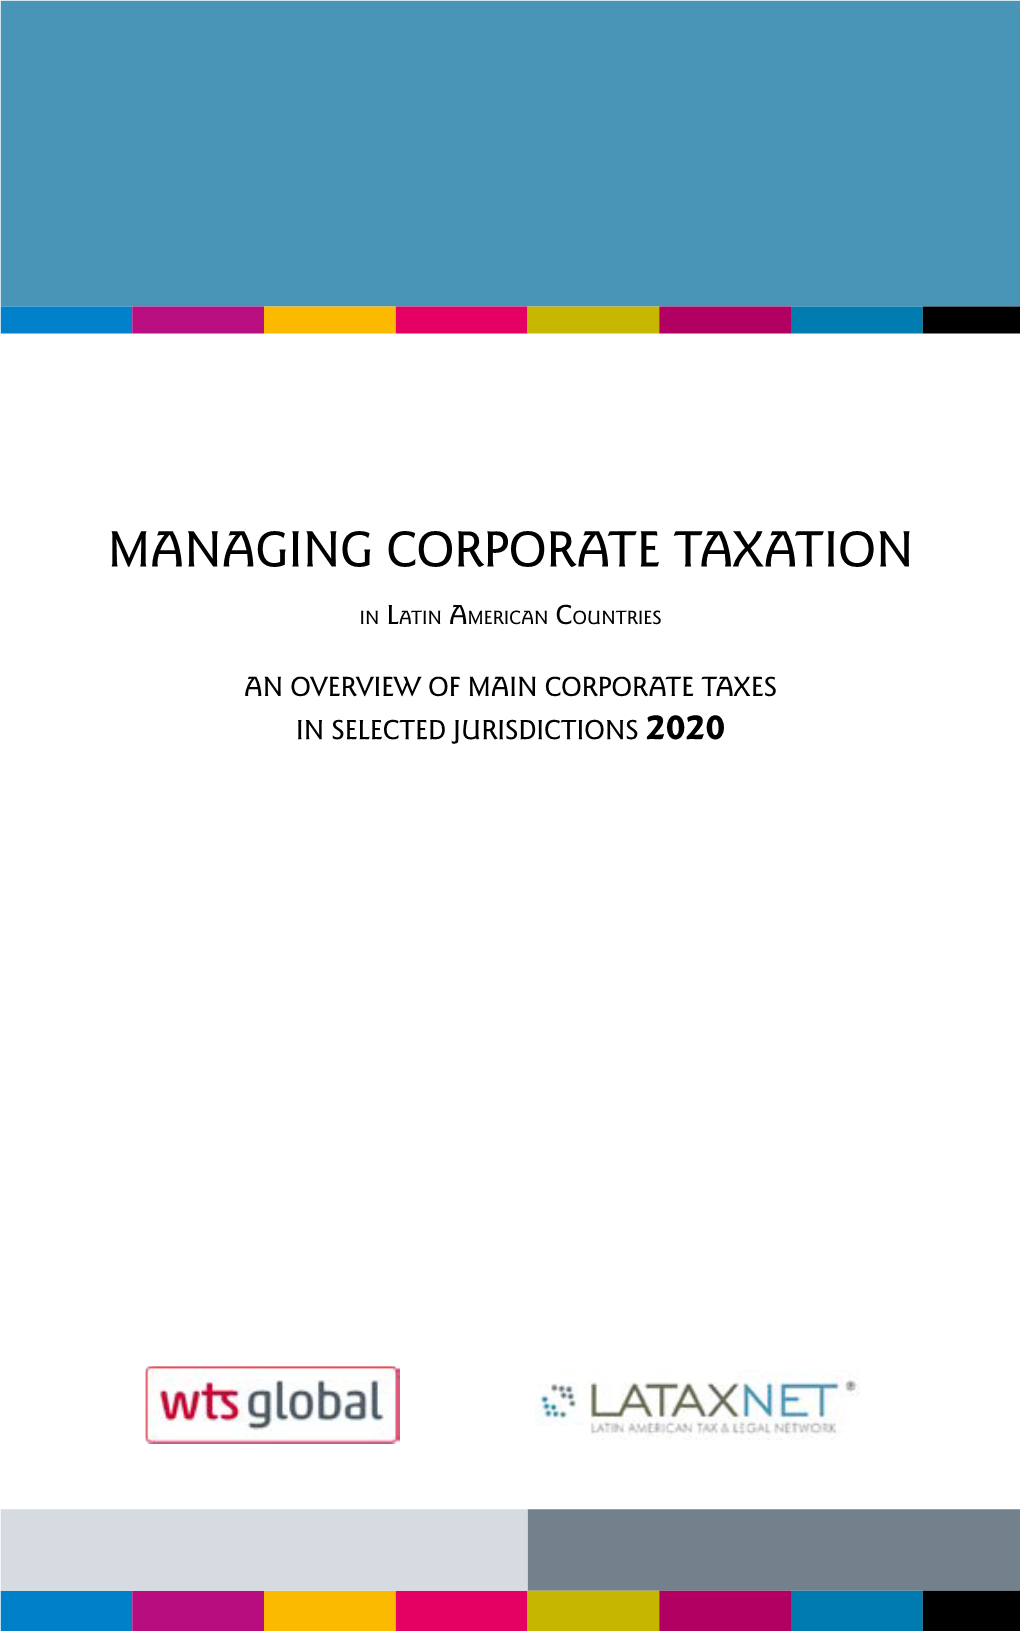 Managing Corporate Taxation